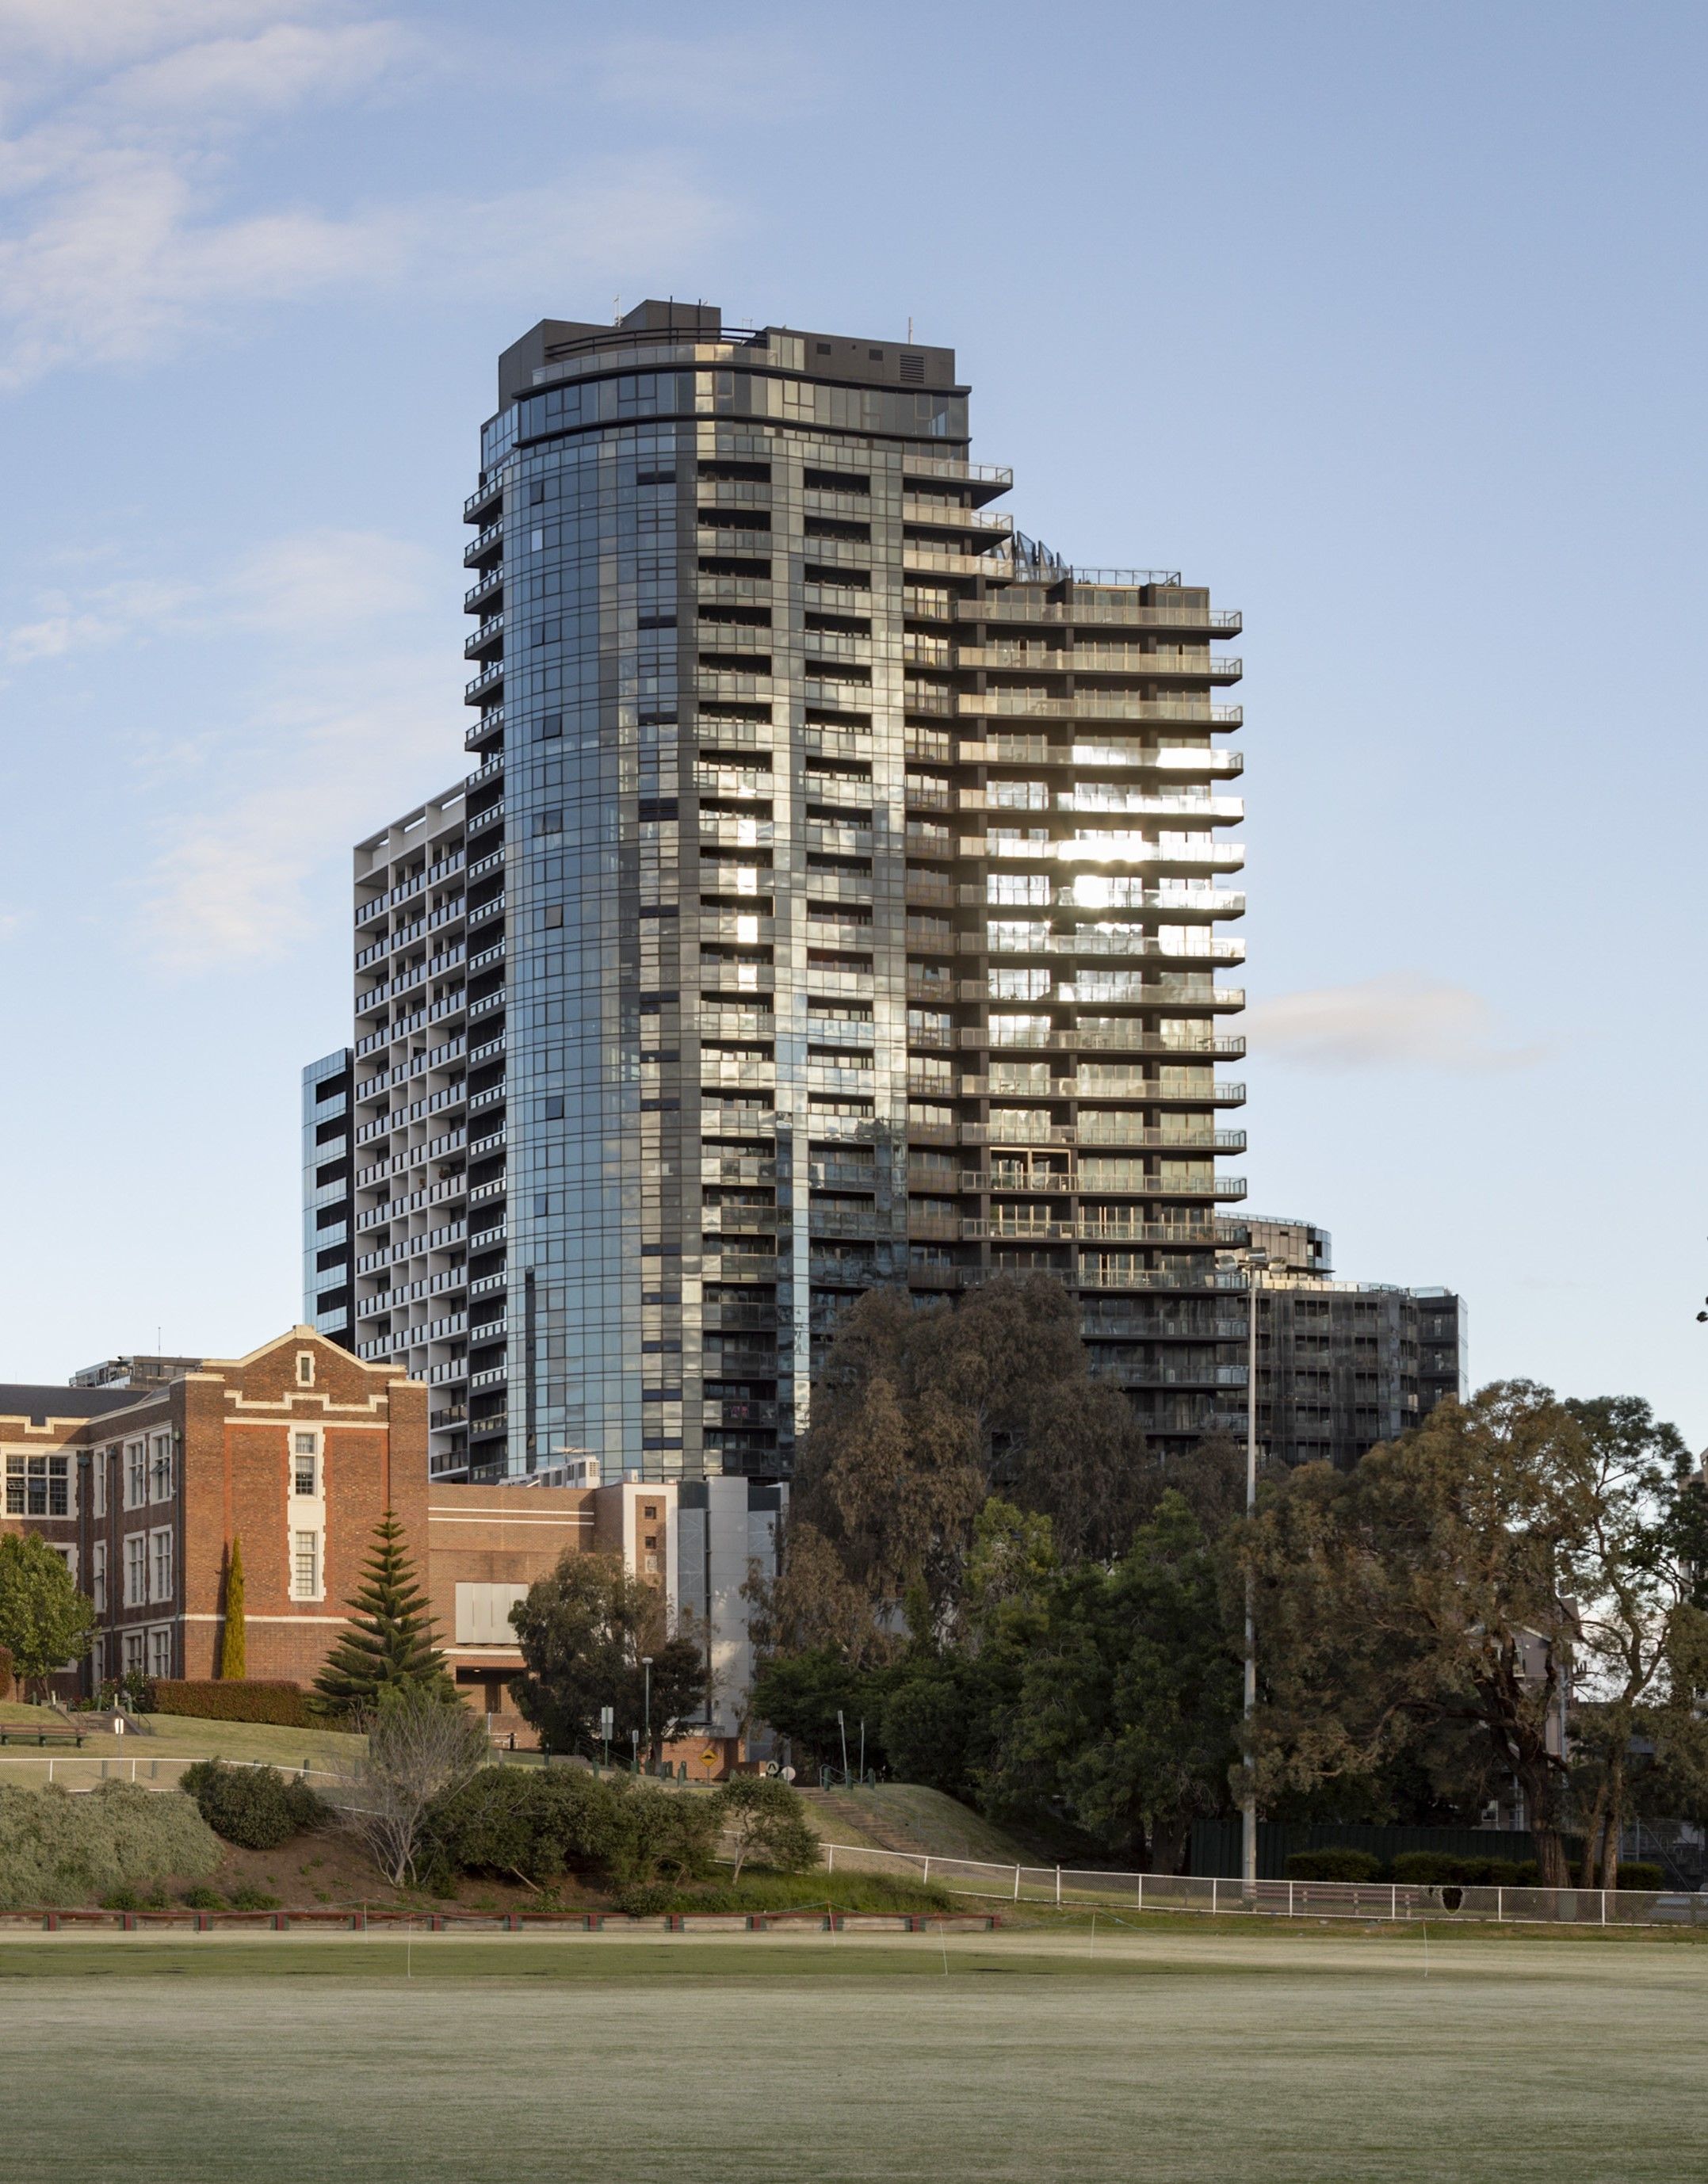 Photograph of a high-rise apartment building in South Yarra.